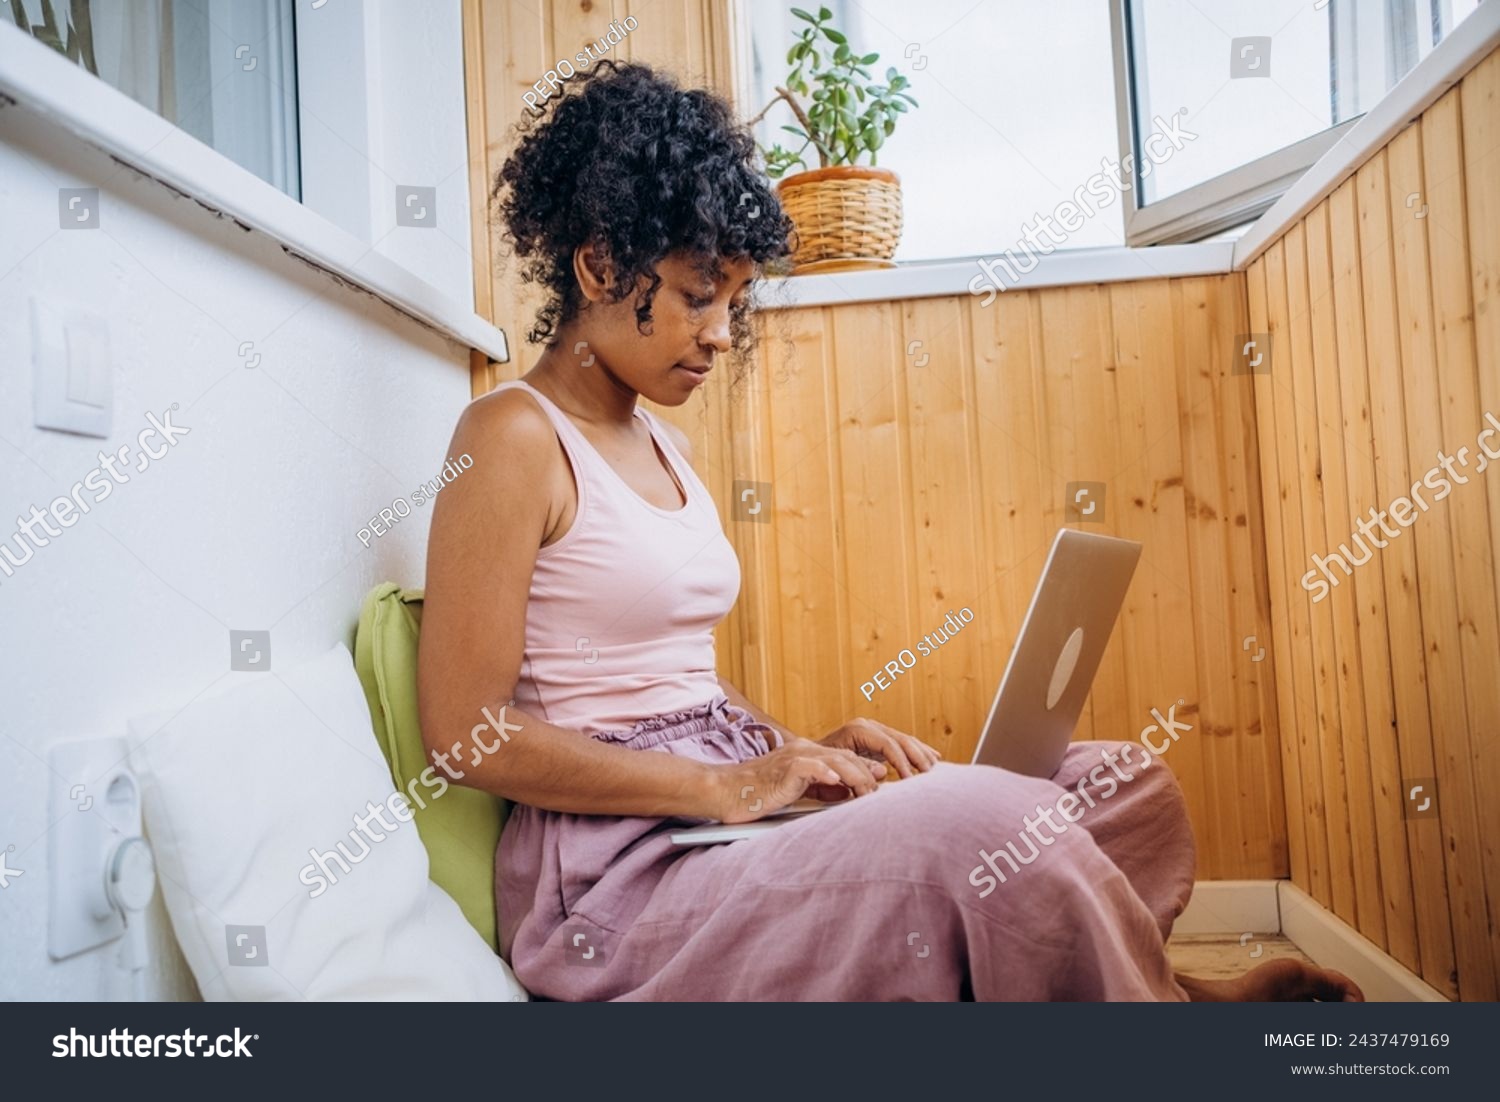 A young woman in casual attire focuses intently on her laptop in a cozy, well-lit wooden alcove. The relaxed home setting emphasizes comfort and productivity. #2437479169